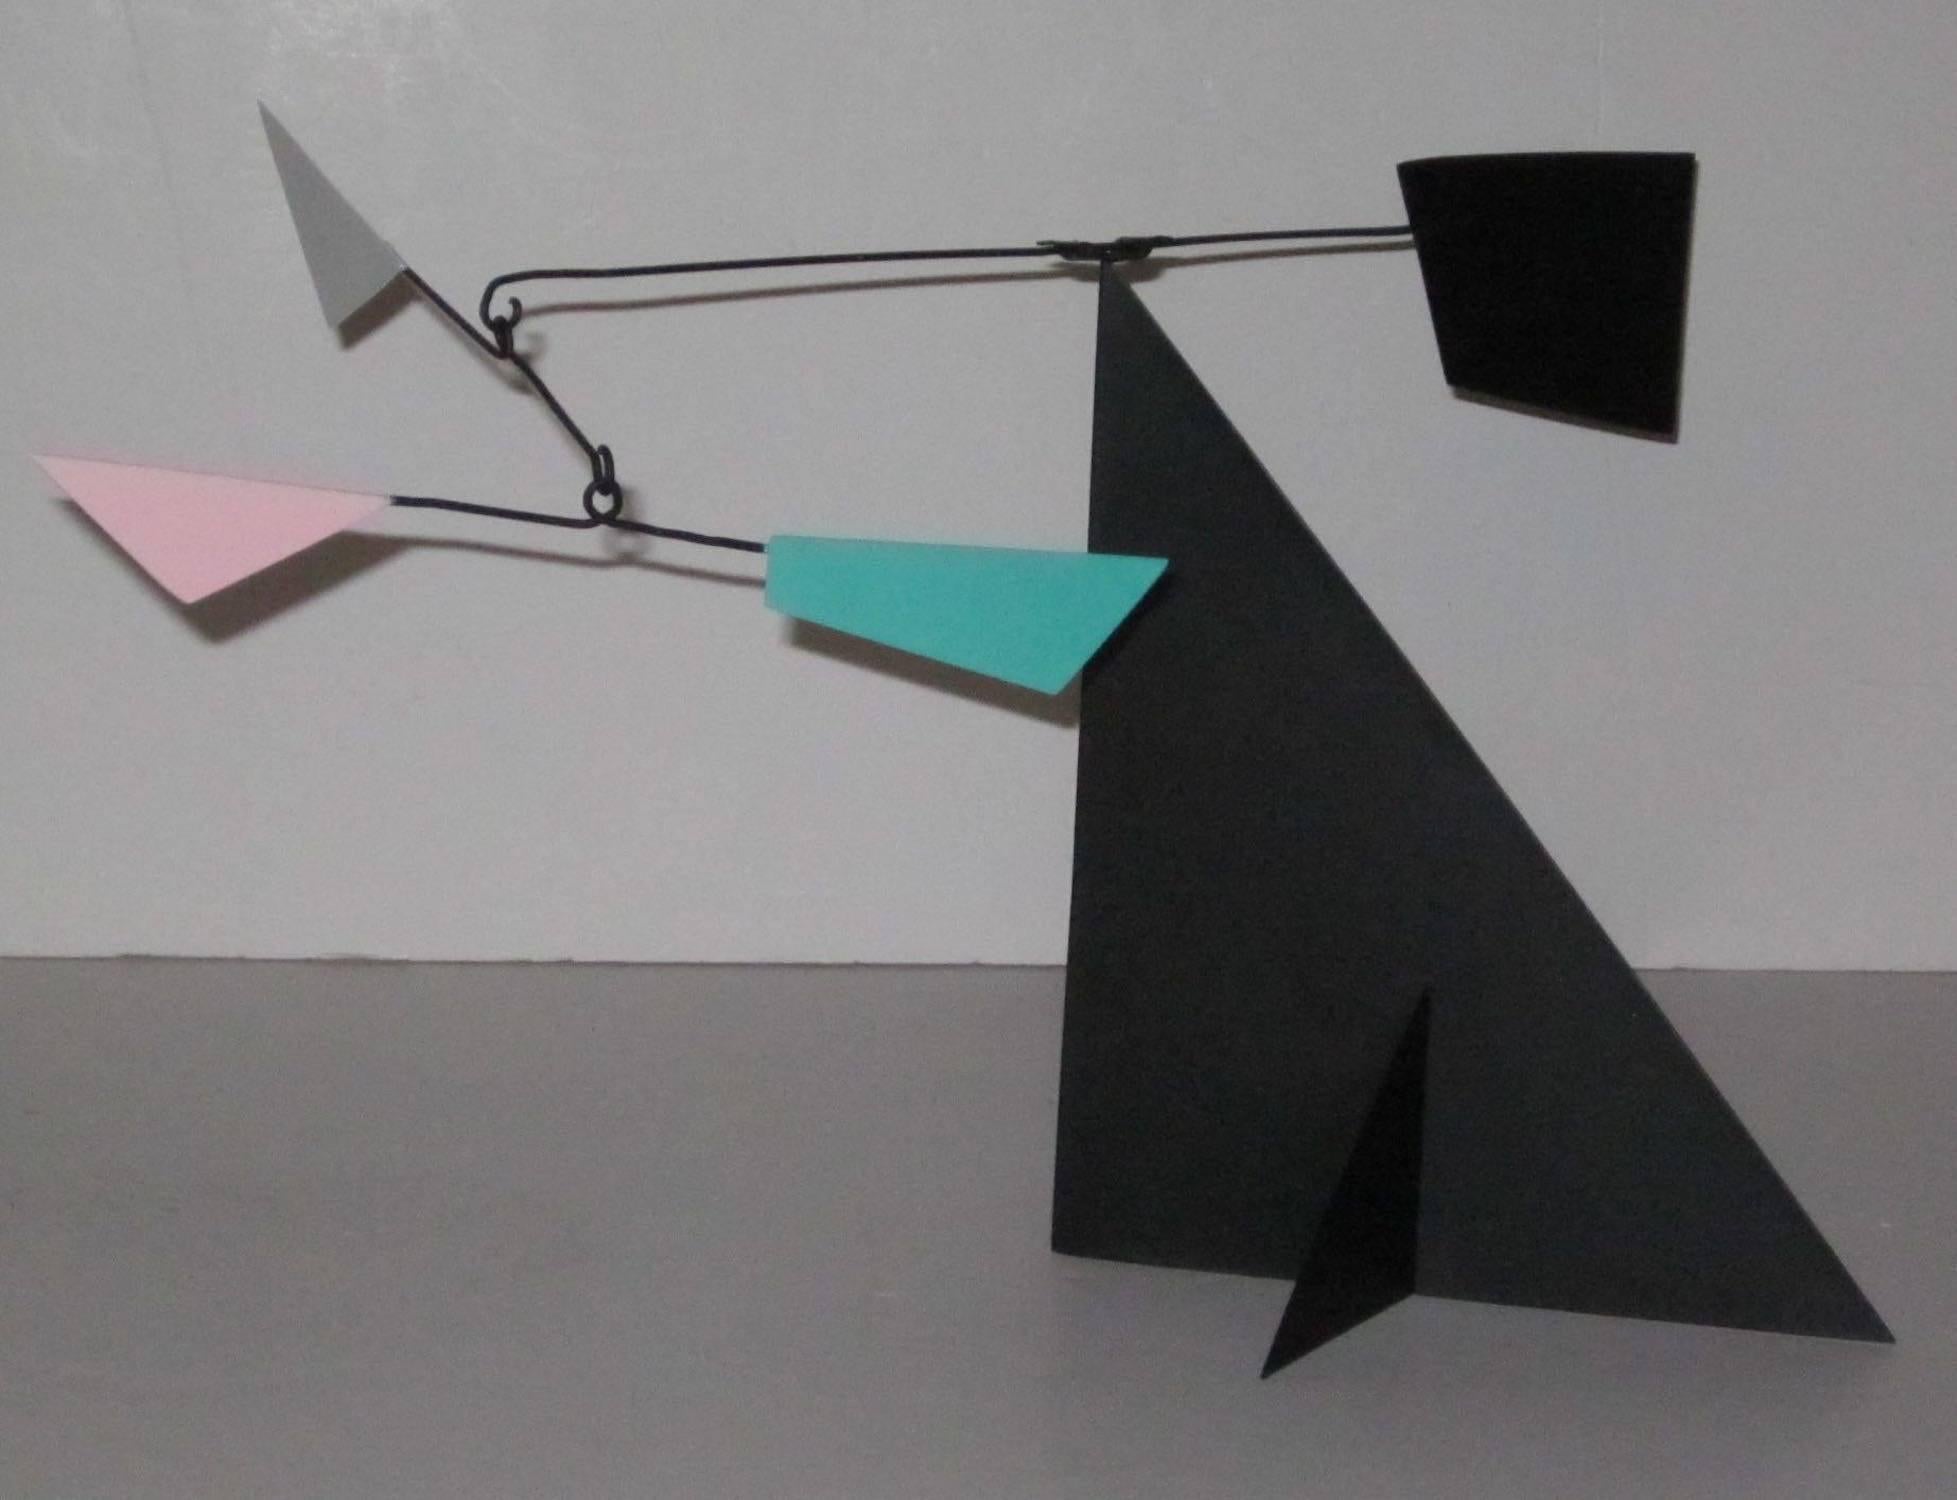 Abstract decorative mobile sculpture in the style of French artist Mario Conti.
Pink, white and turq color accents on a black base.
Measurements: 21 L x 9 W x 10 H base is 9 x 6.